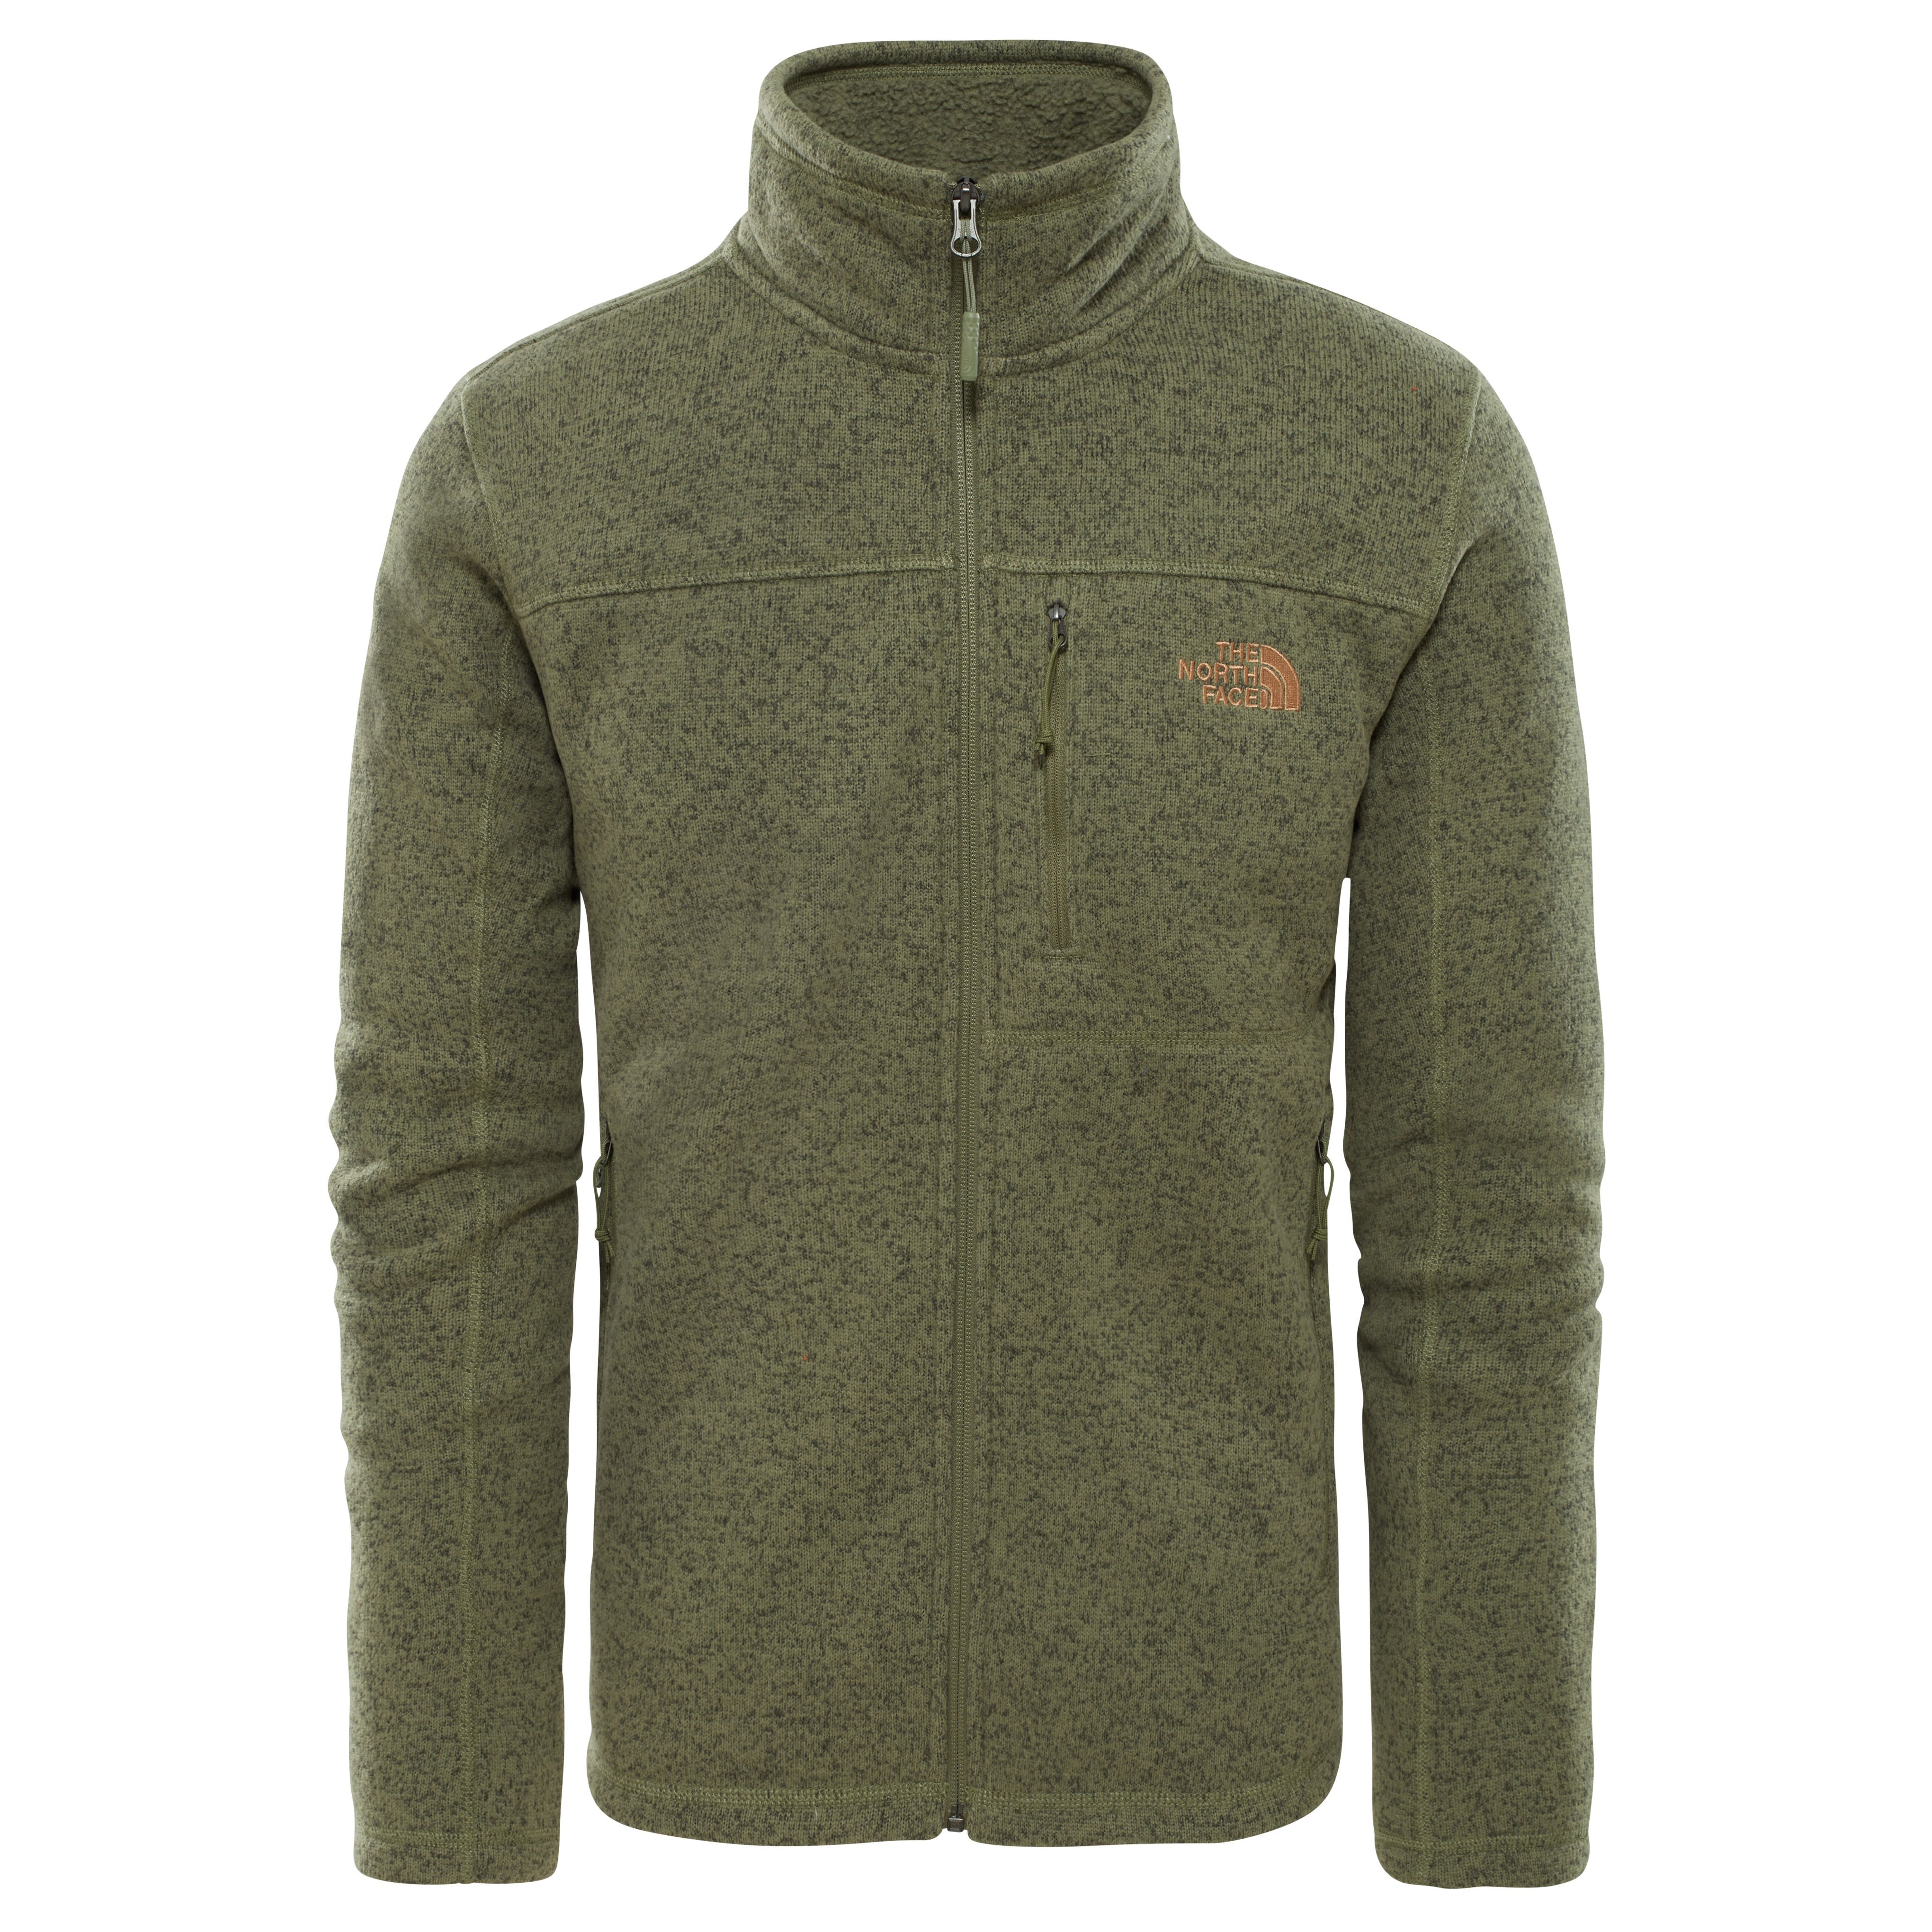 Buy The North Face Men's Gordon Lyons Full Zip from Outnorth